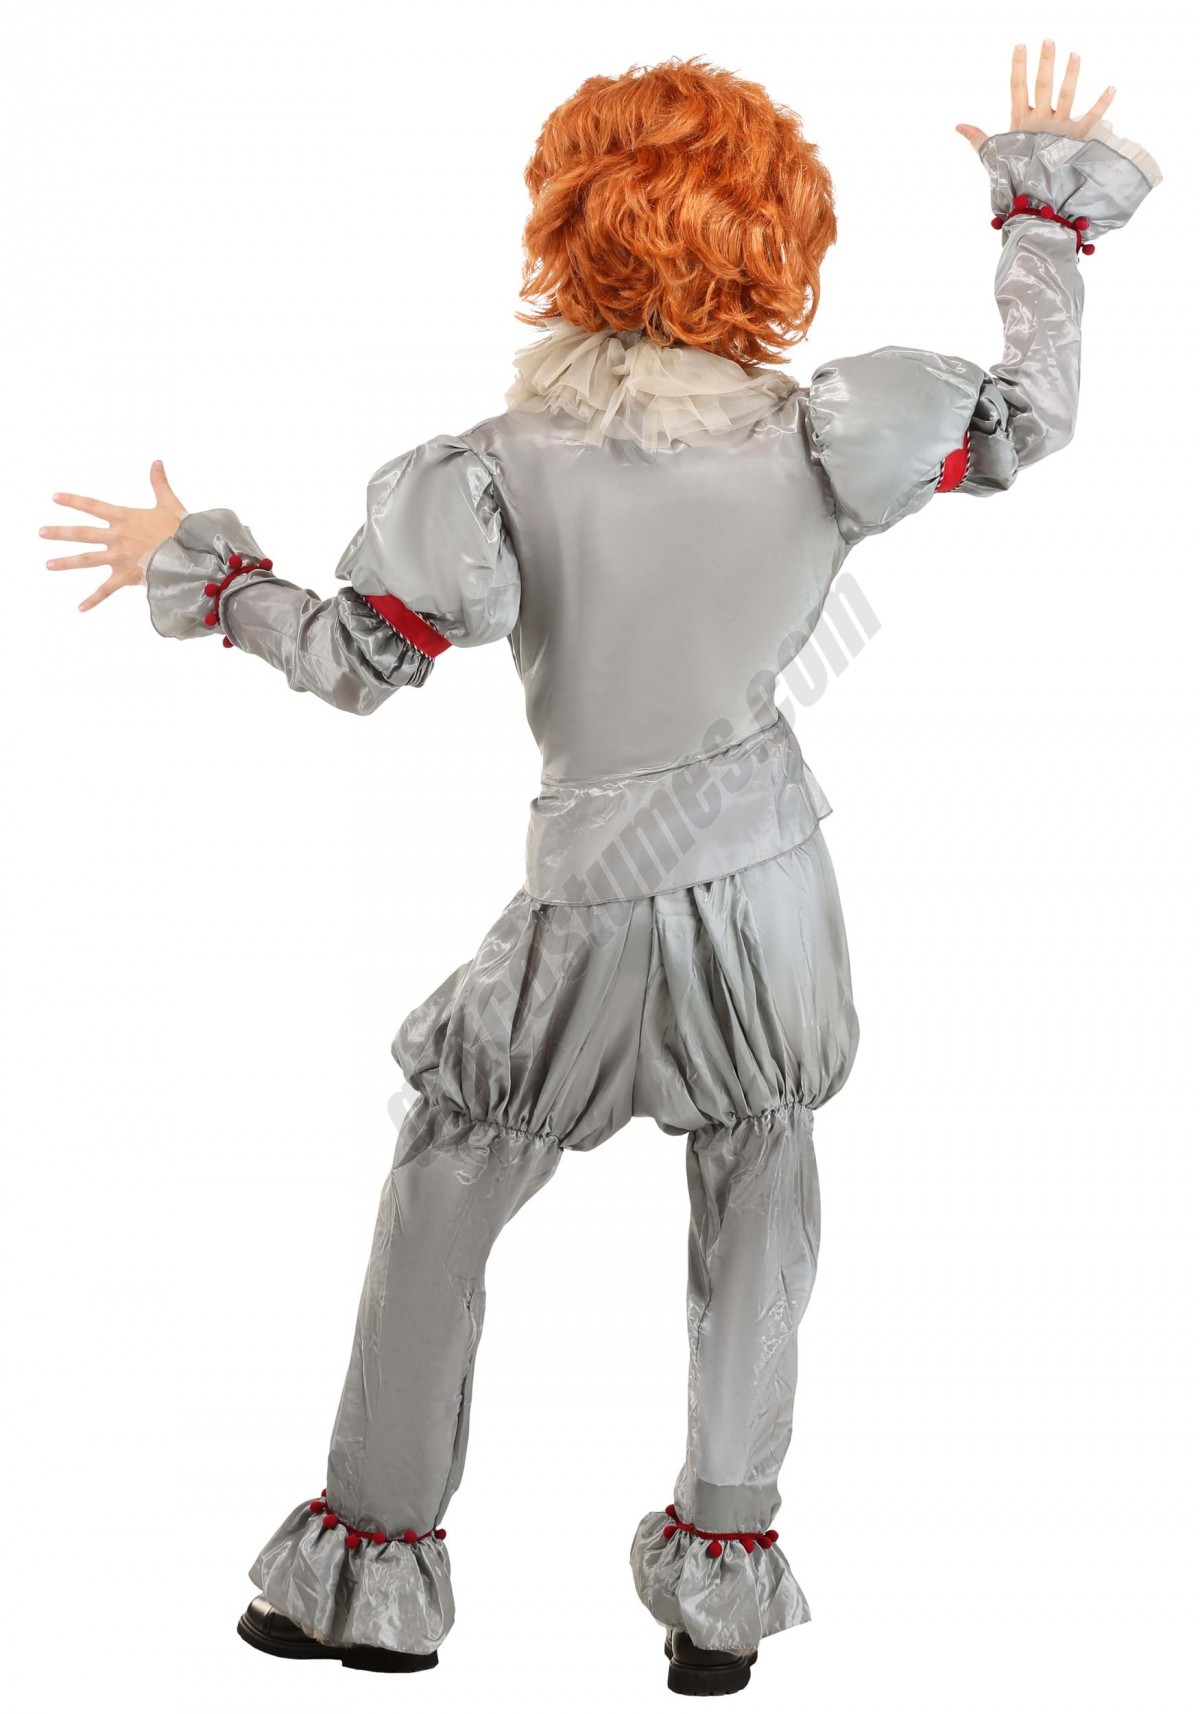 Grand Heritage Pennywise Movie Adult Costume - Men's - -1